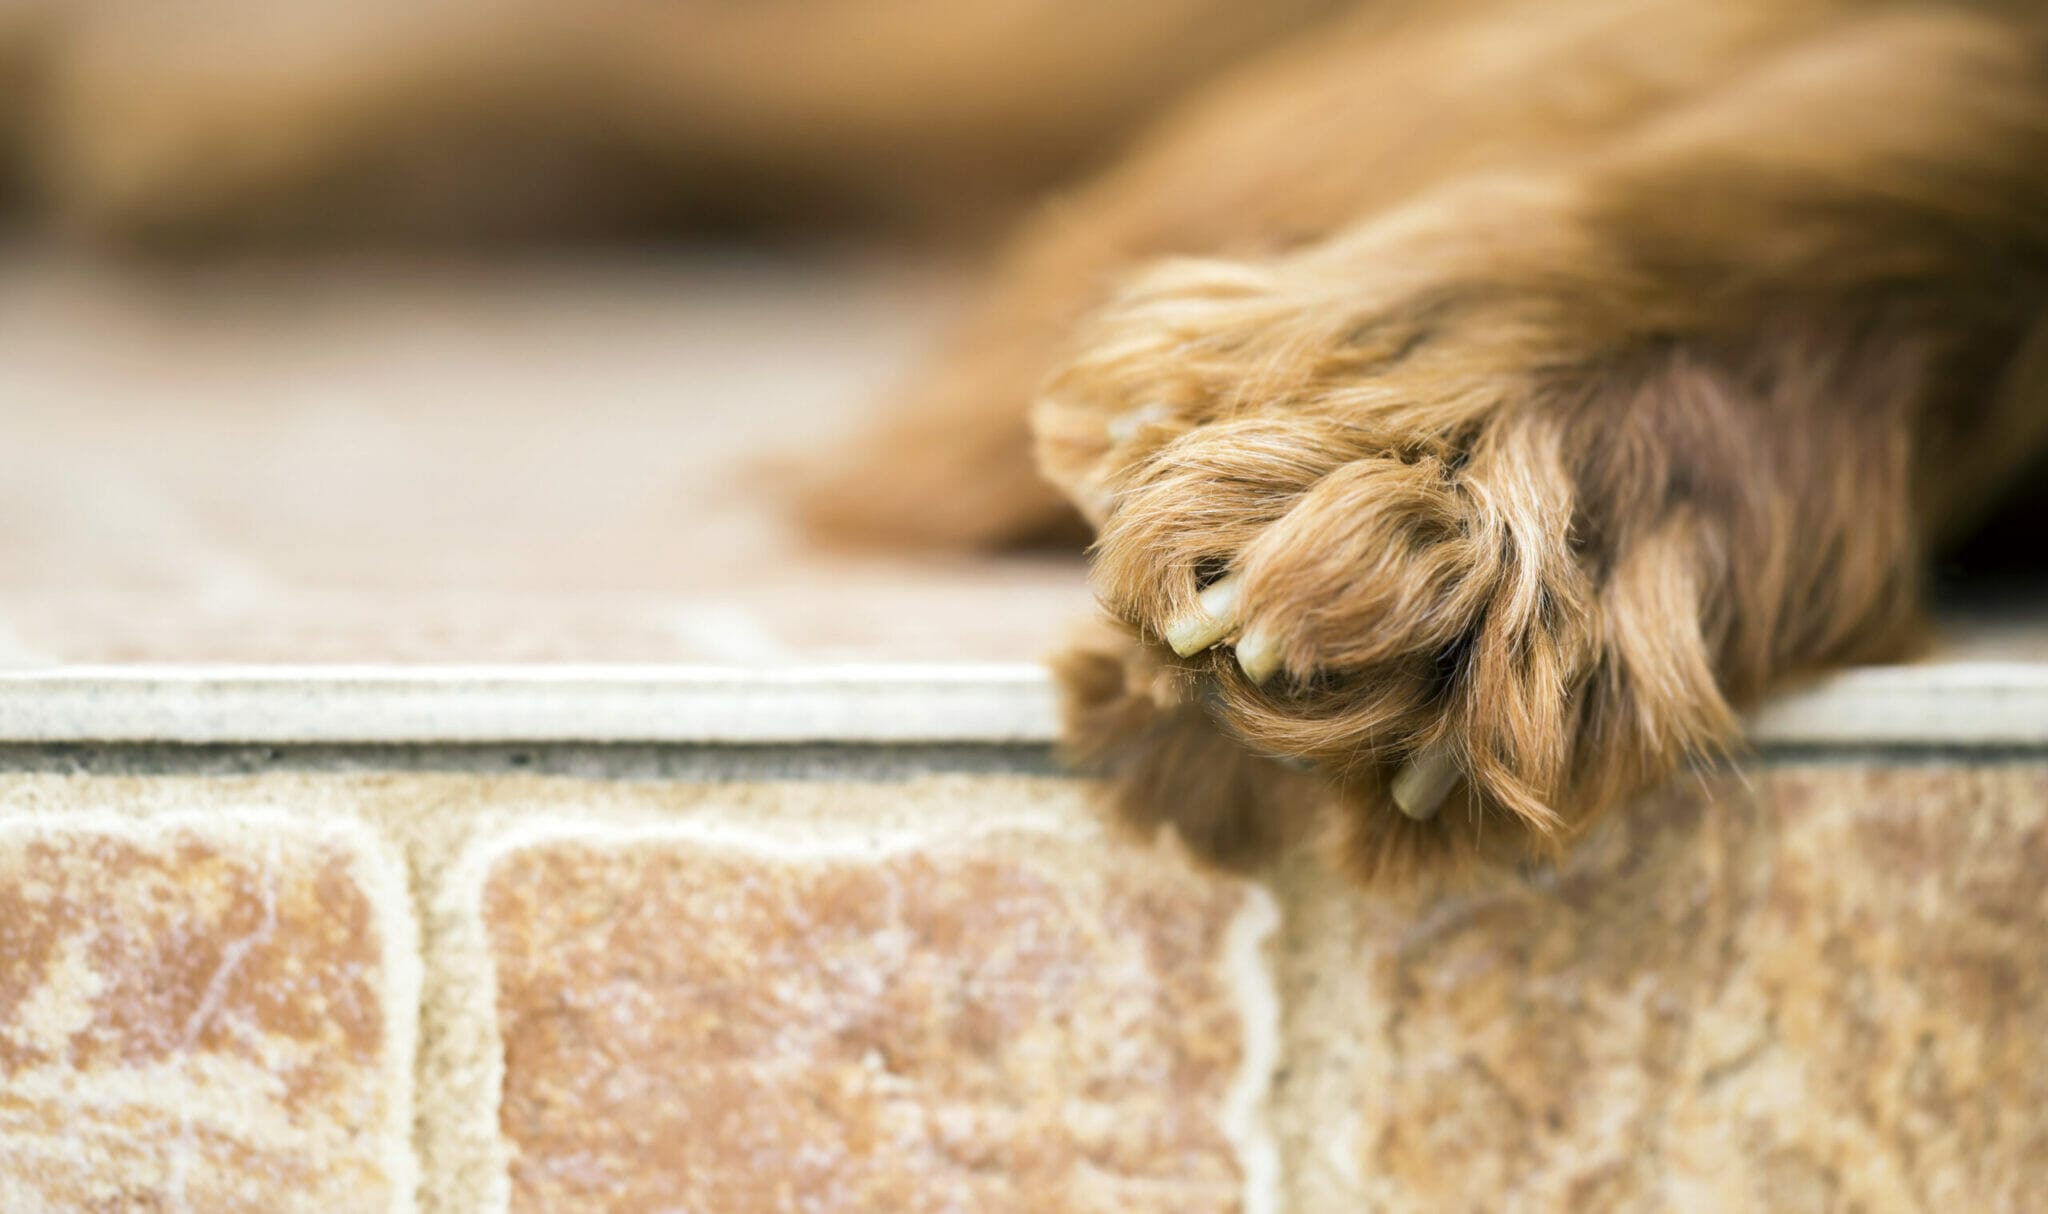 How can dogs get ingrown toenails?